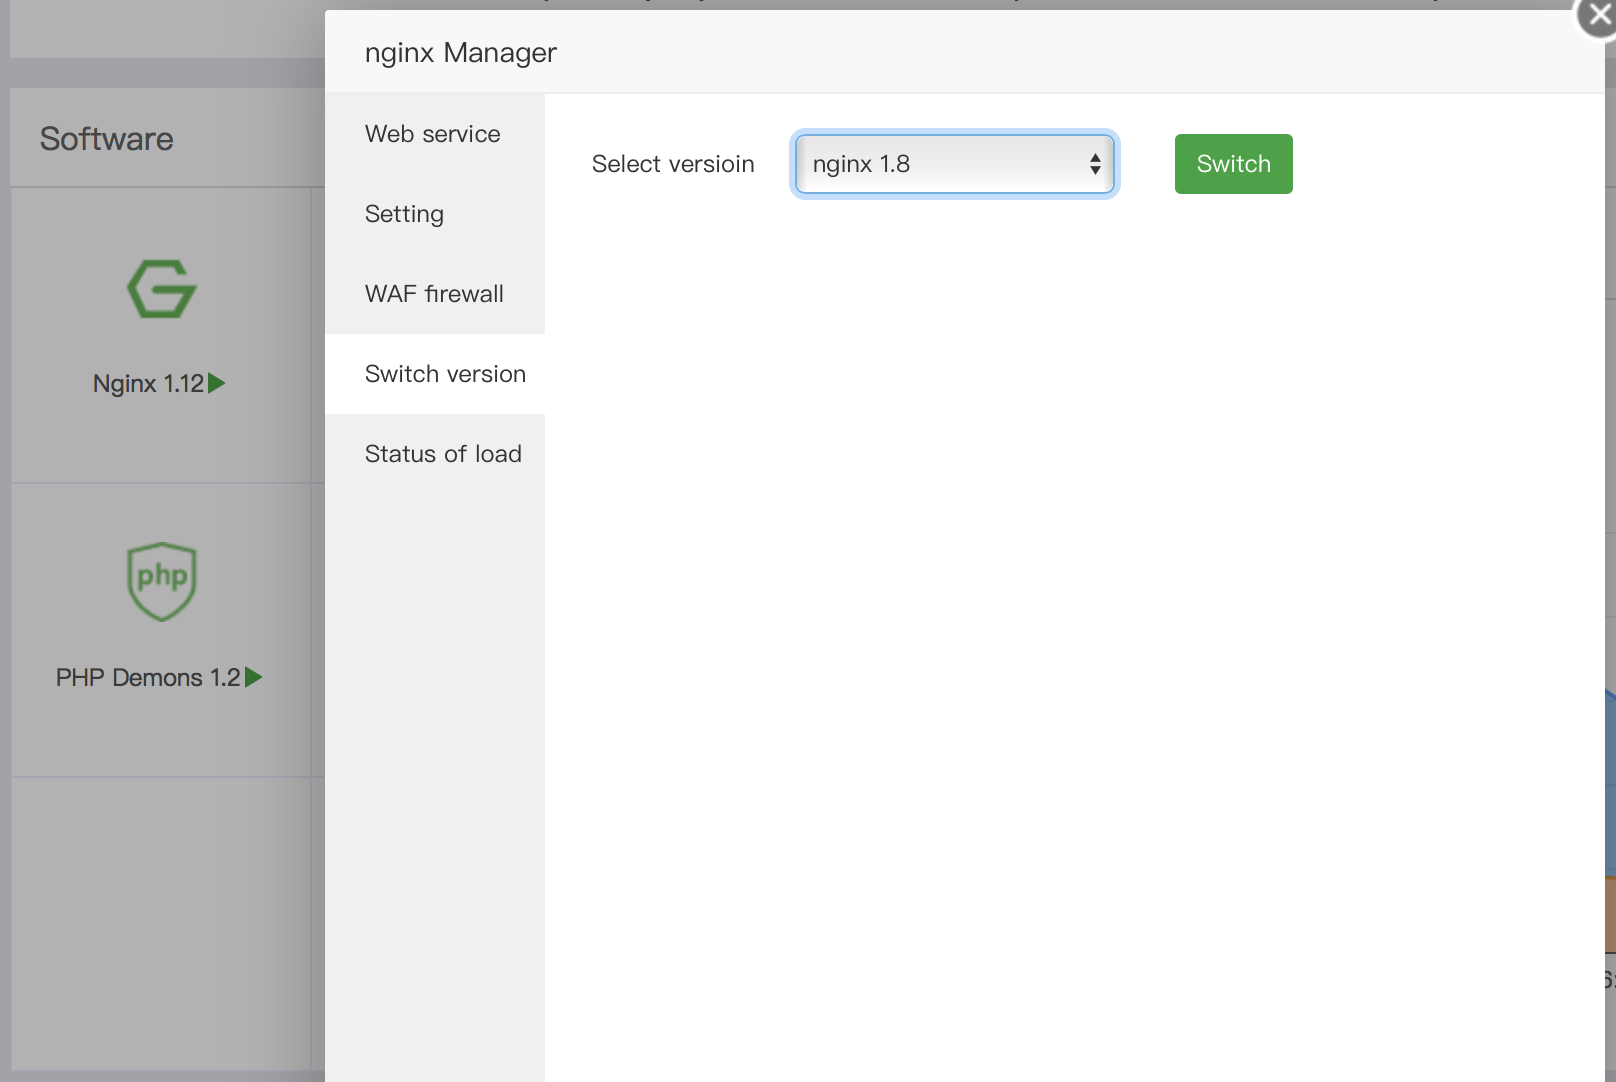 aapanel switch nginx version